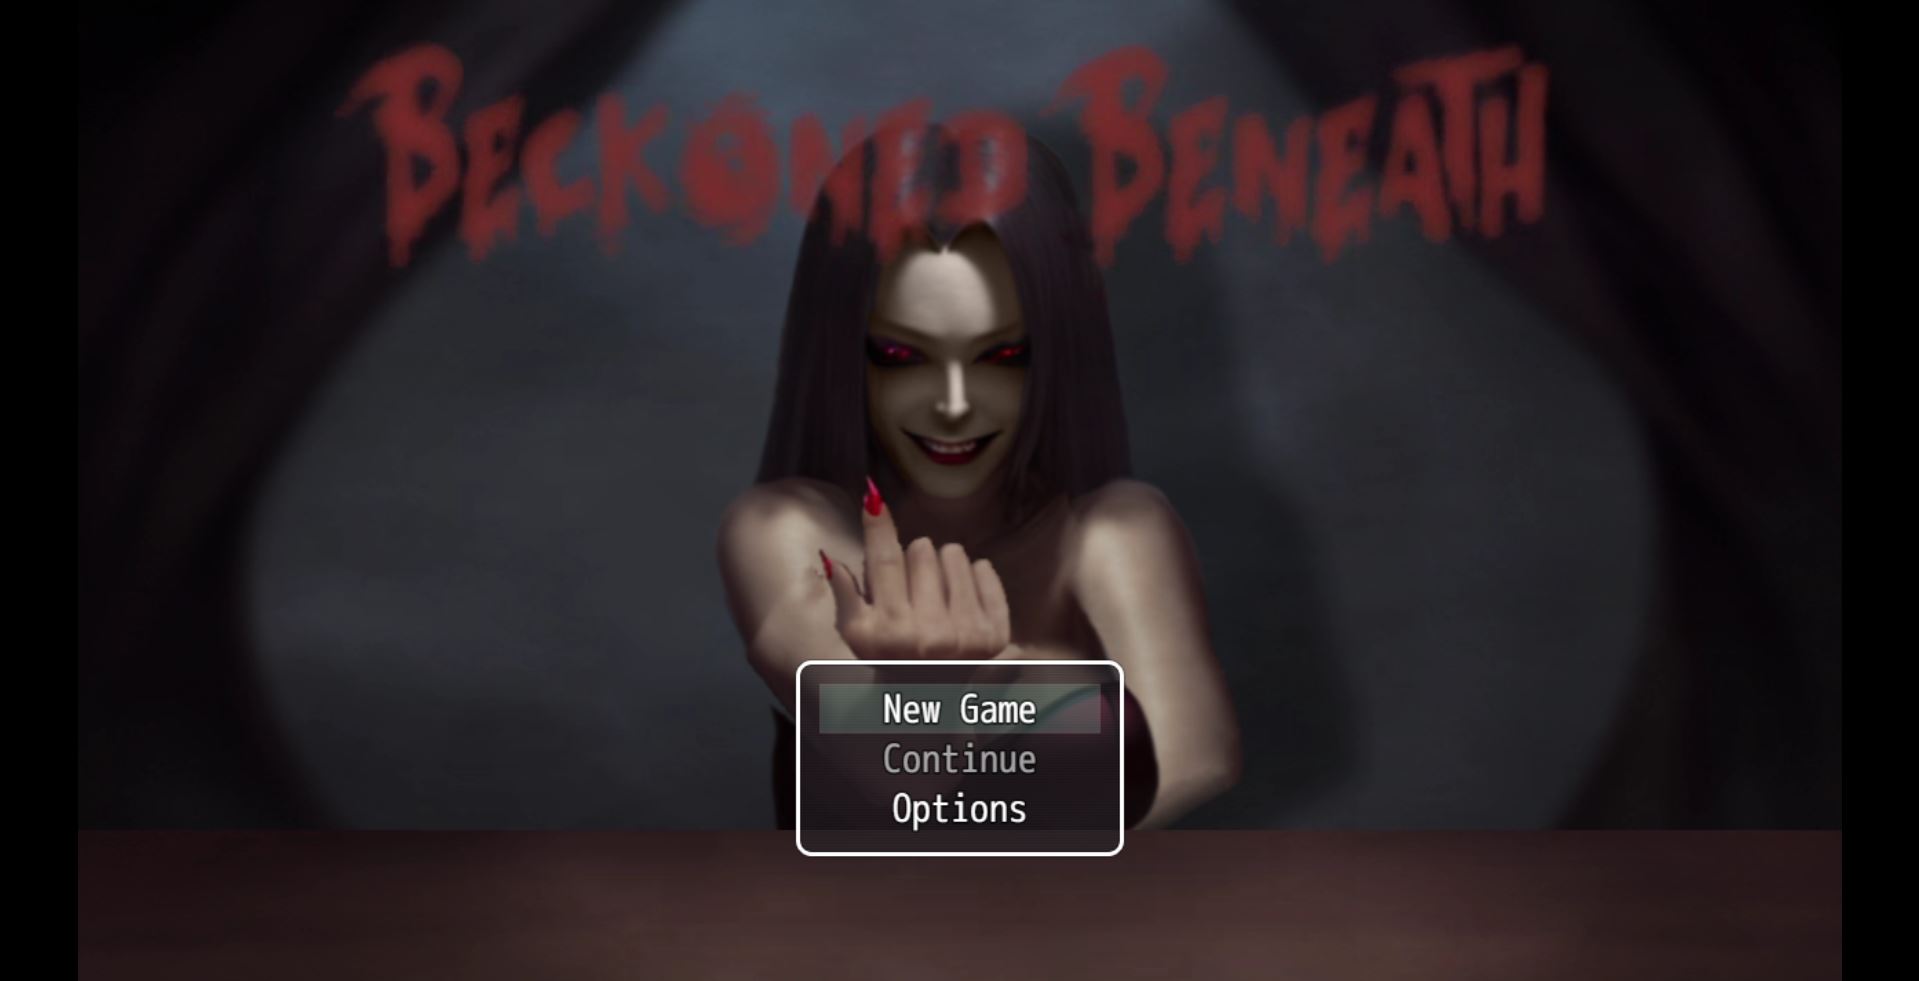 Beckoned Beneath porn xxx game download cover